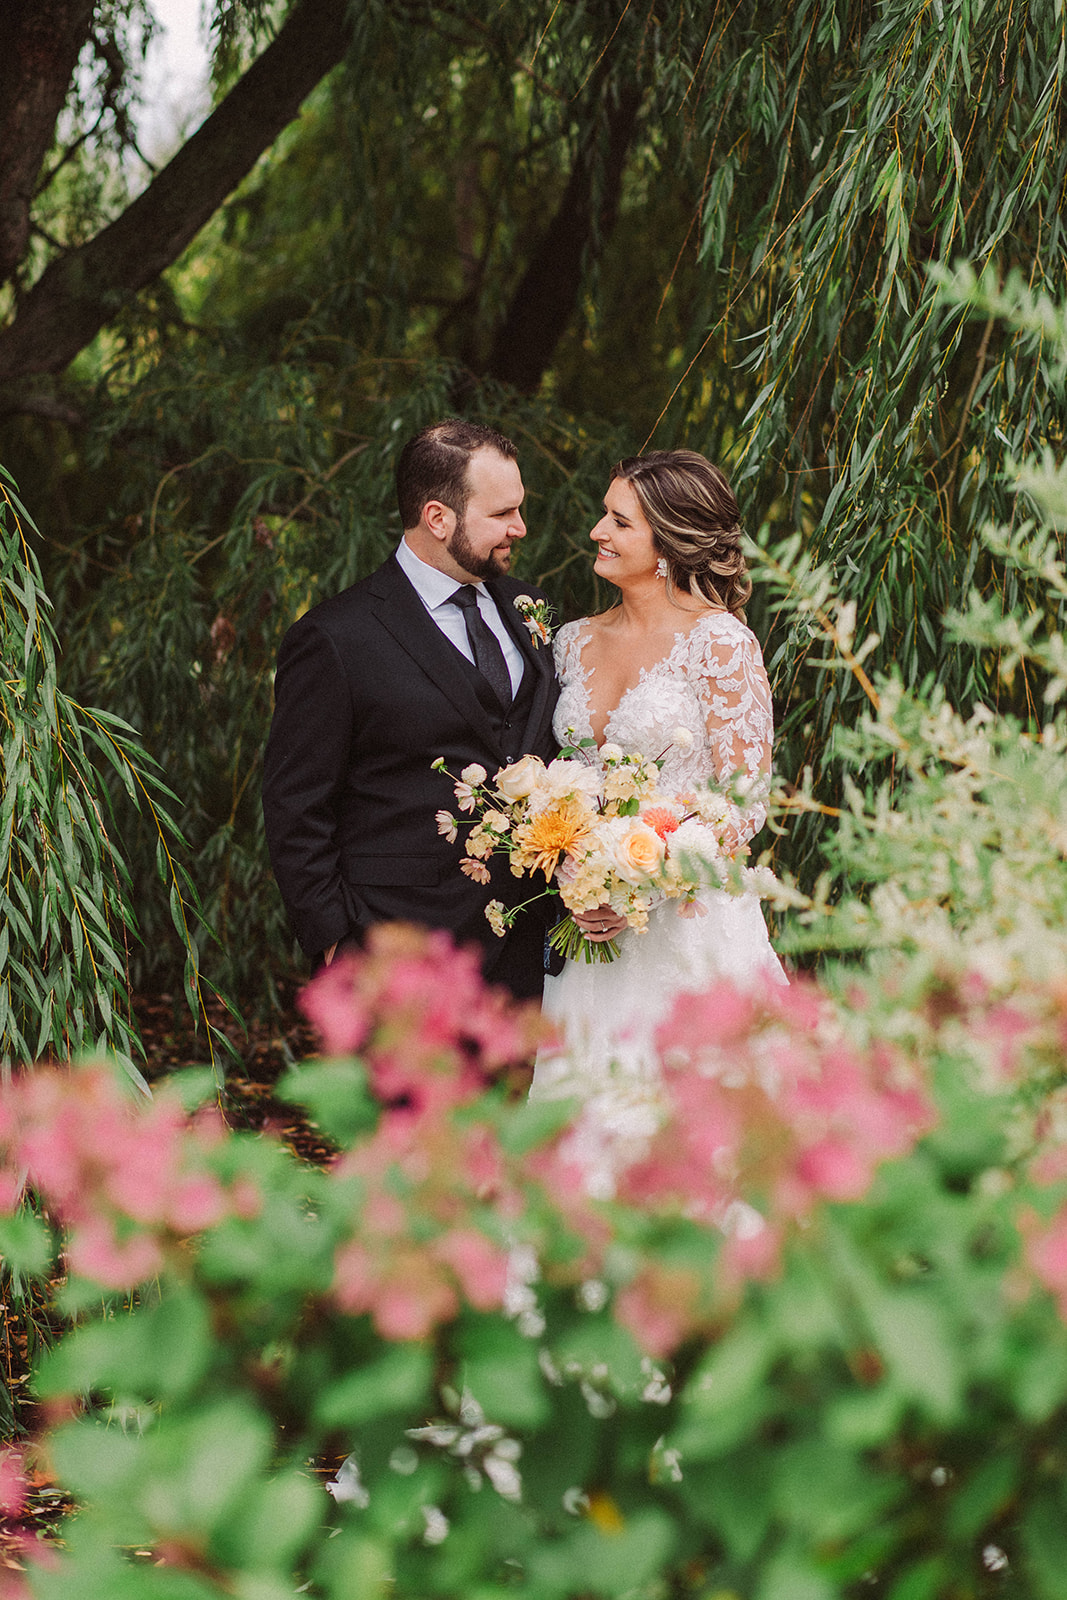 Sweet and timeless wedding portraits of a bride and groom under the huge willow tree at Aurora Cellars